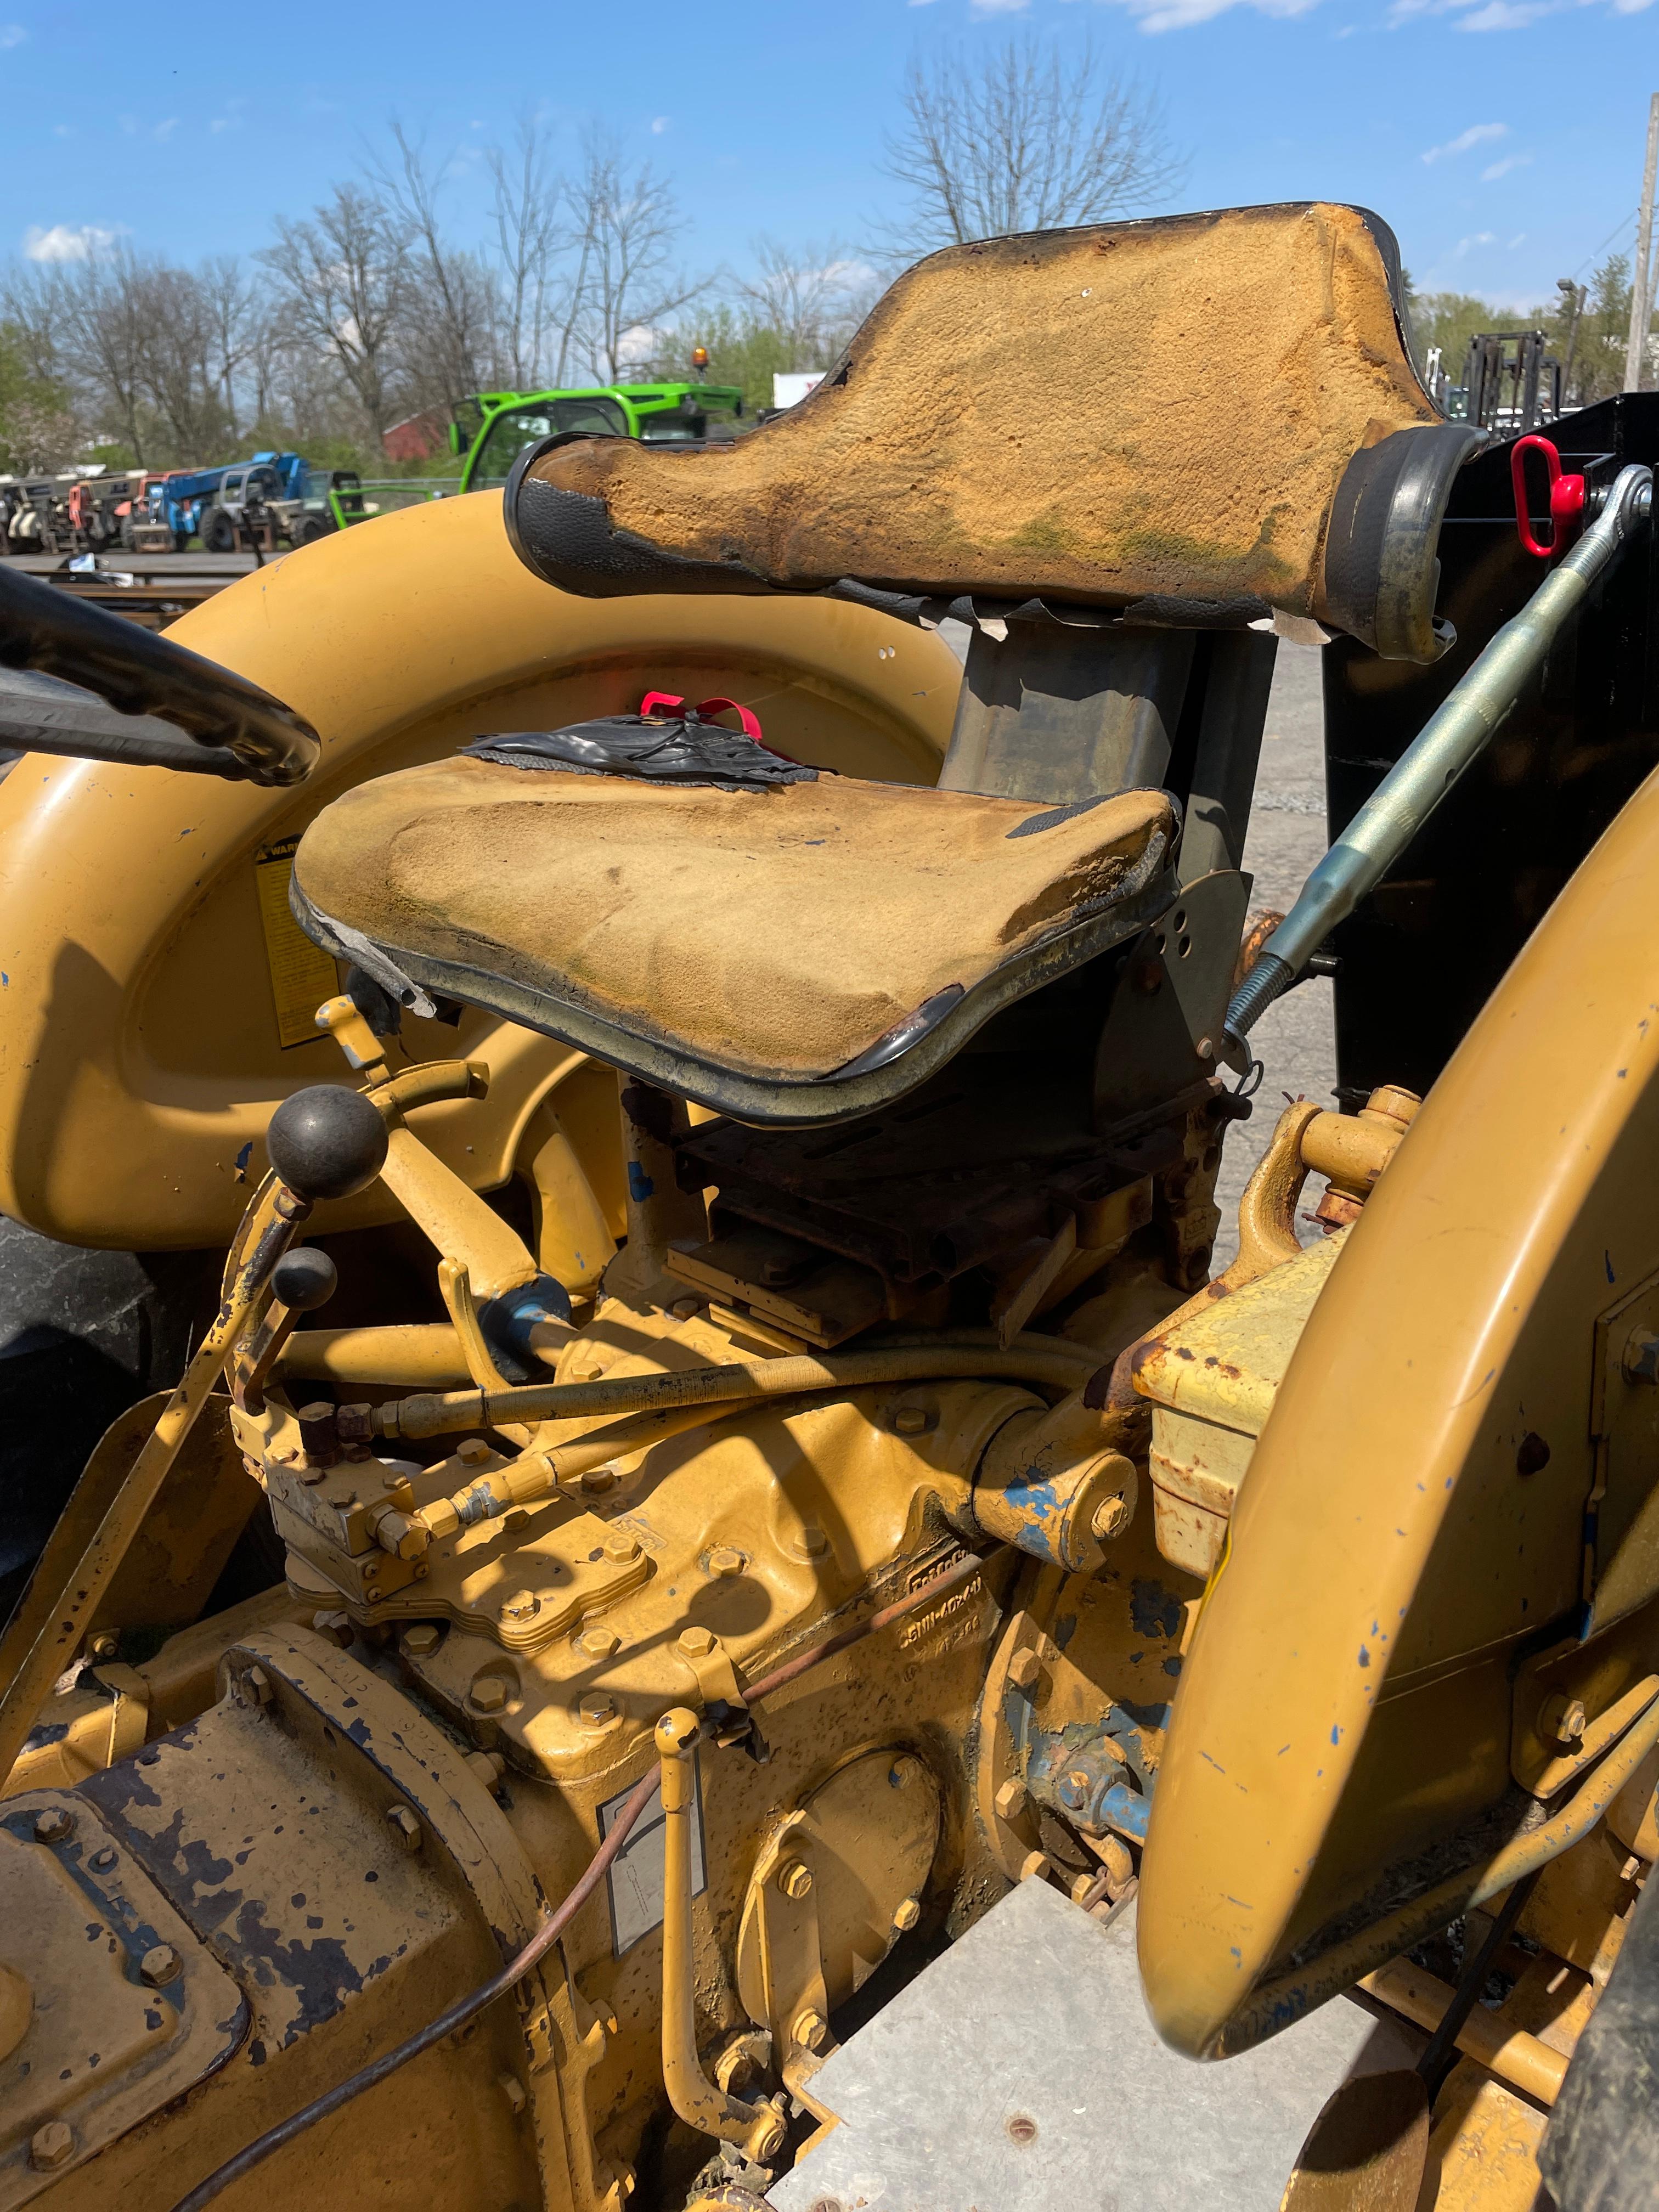 Ford 3400 Industrial Tractor W/ Front End Loader